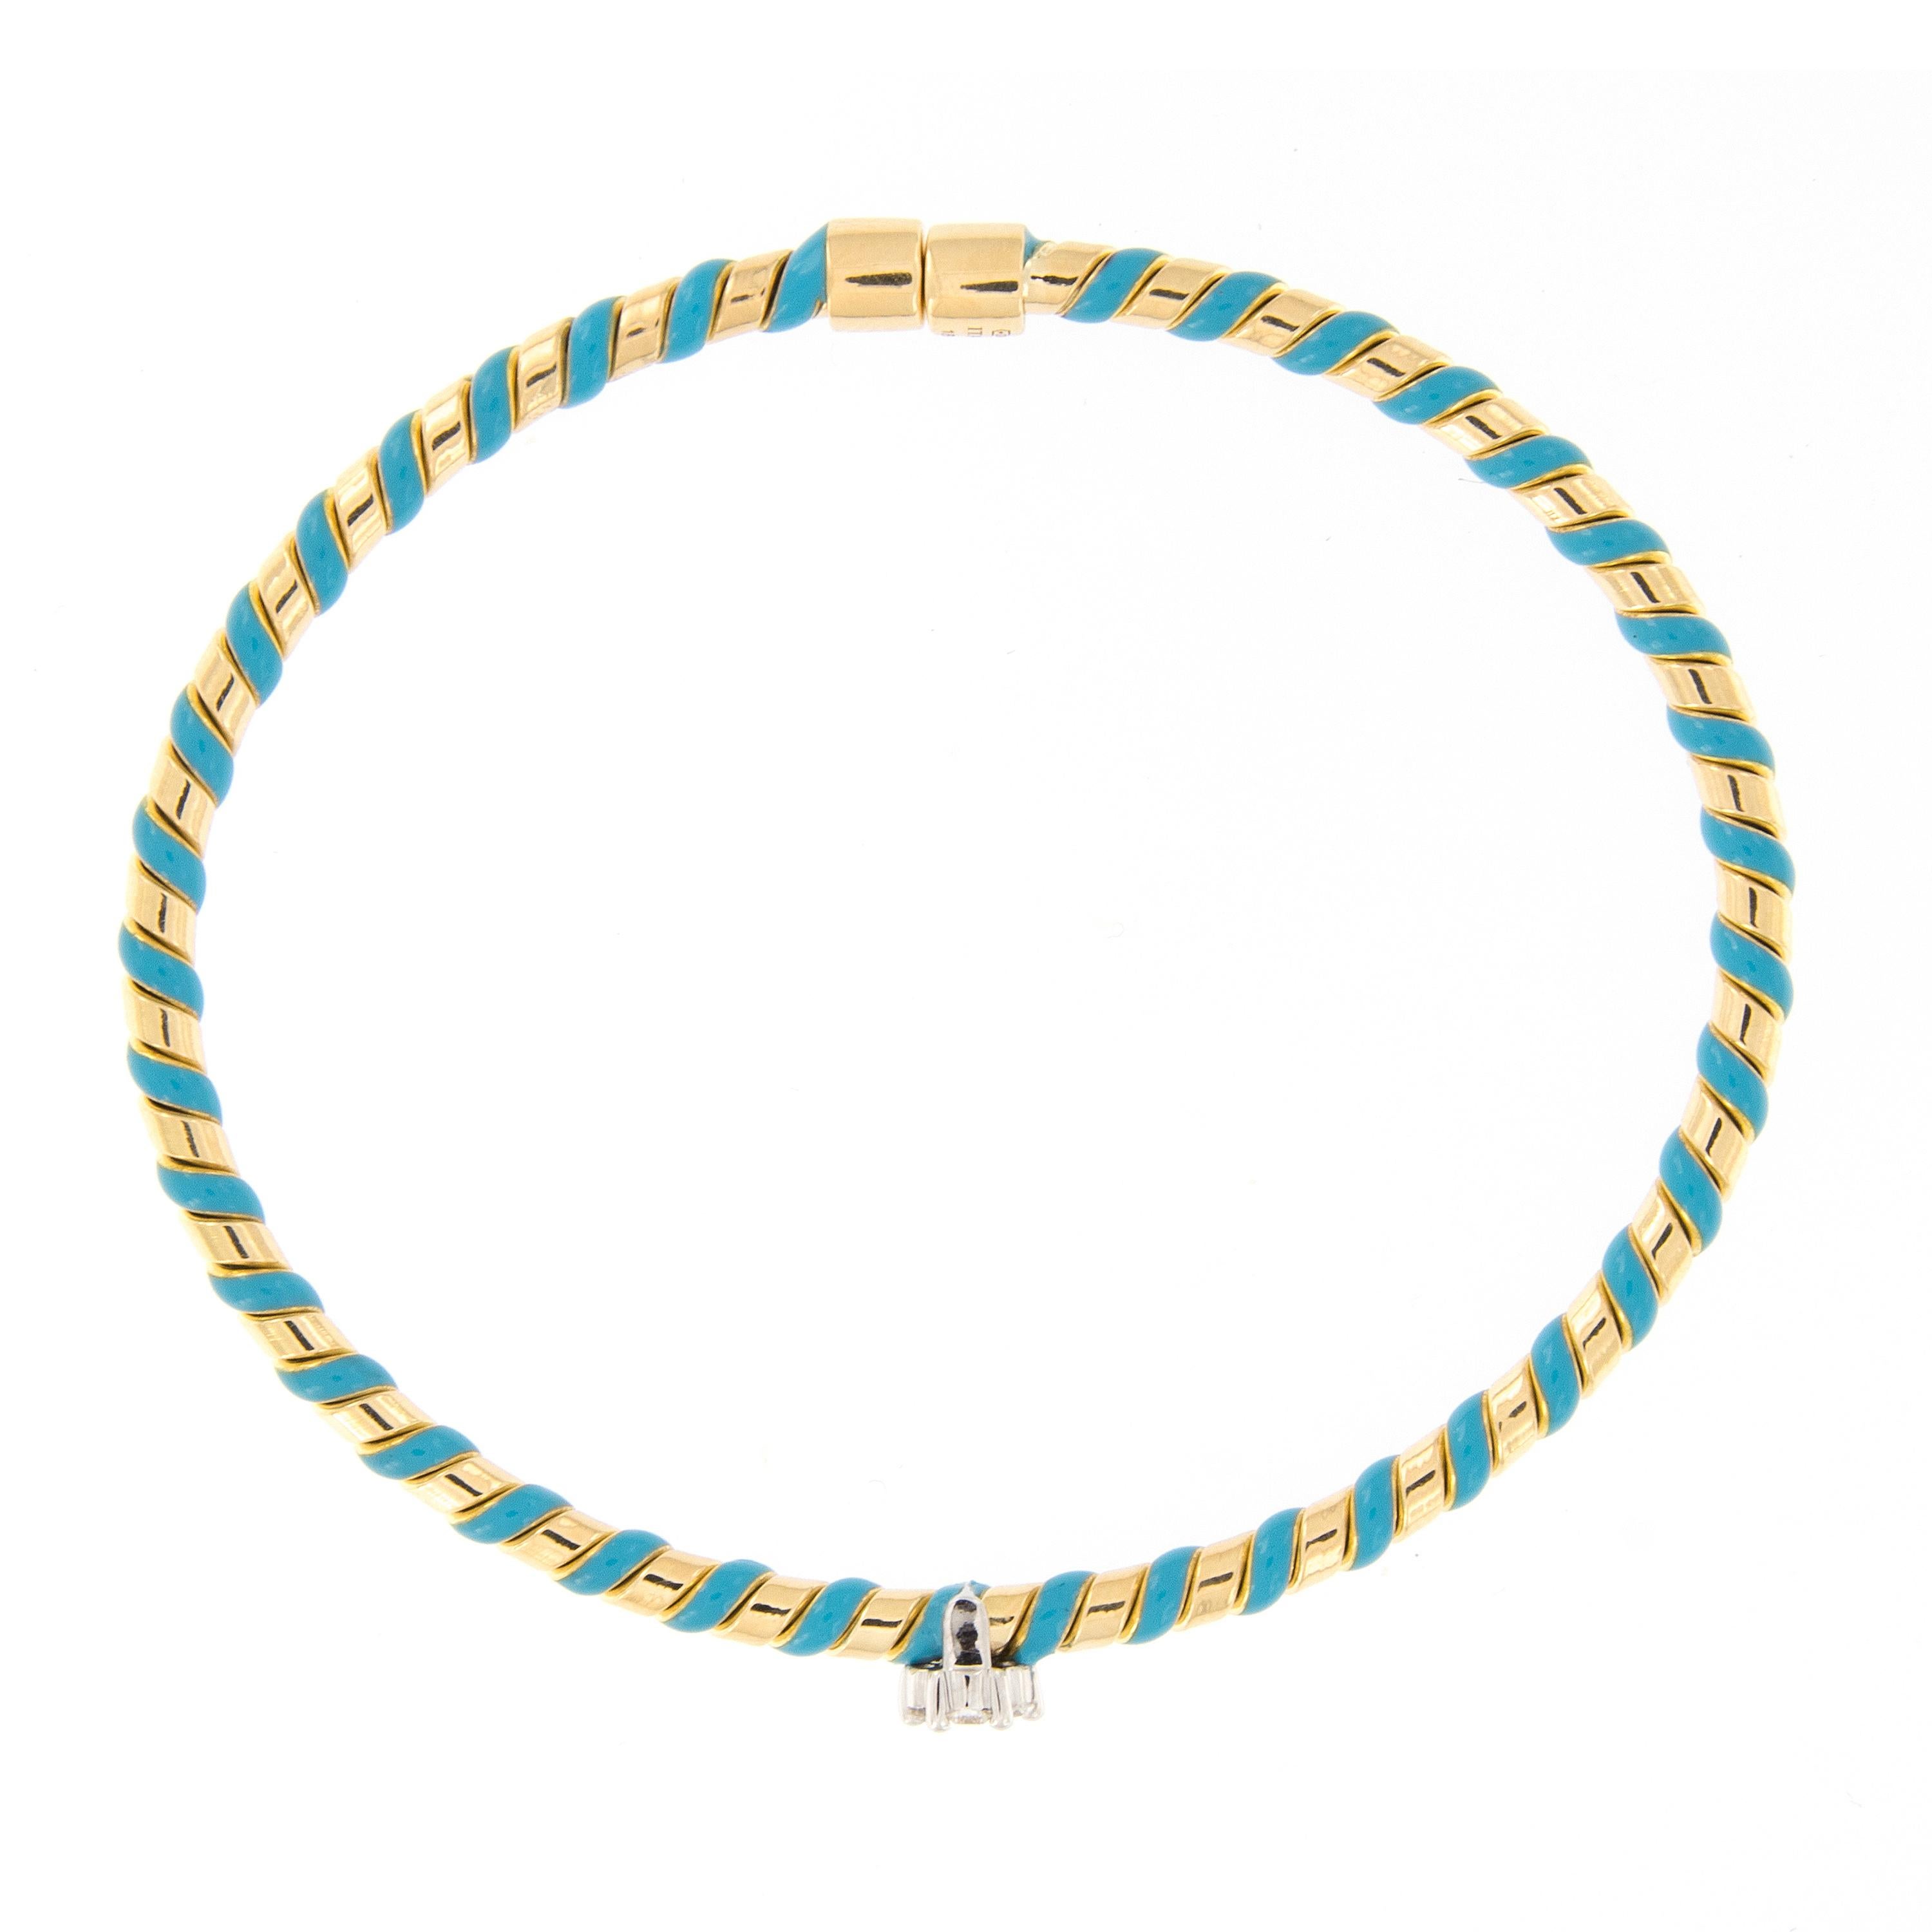 18 Karat gold bracelet features a twisted design of turquoise blue enamel accented with a diamond flower cluster. Bracelet is beautifully handcrafted by Italian artisans, lovely on its own and perfect for stacking. Marked Italy.

Diamond 0.17 cttw